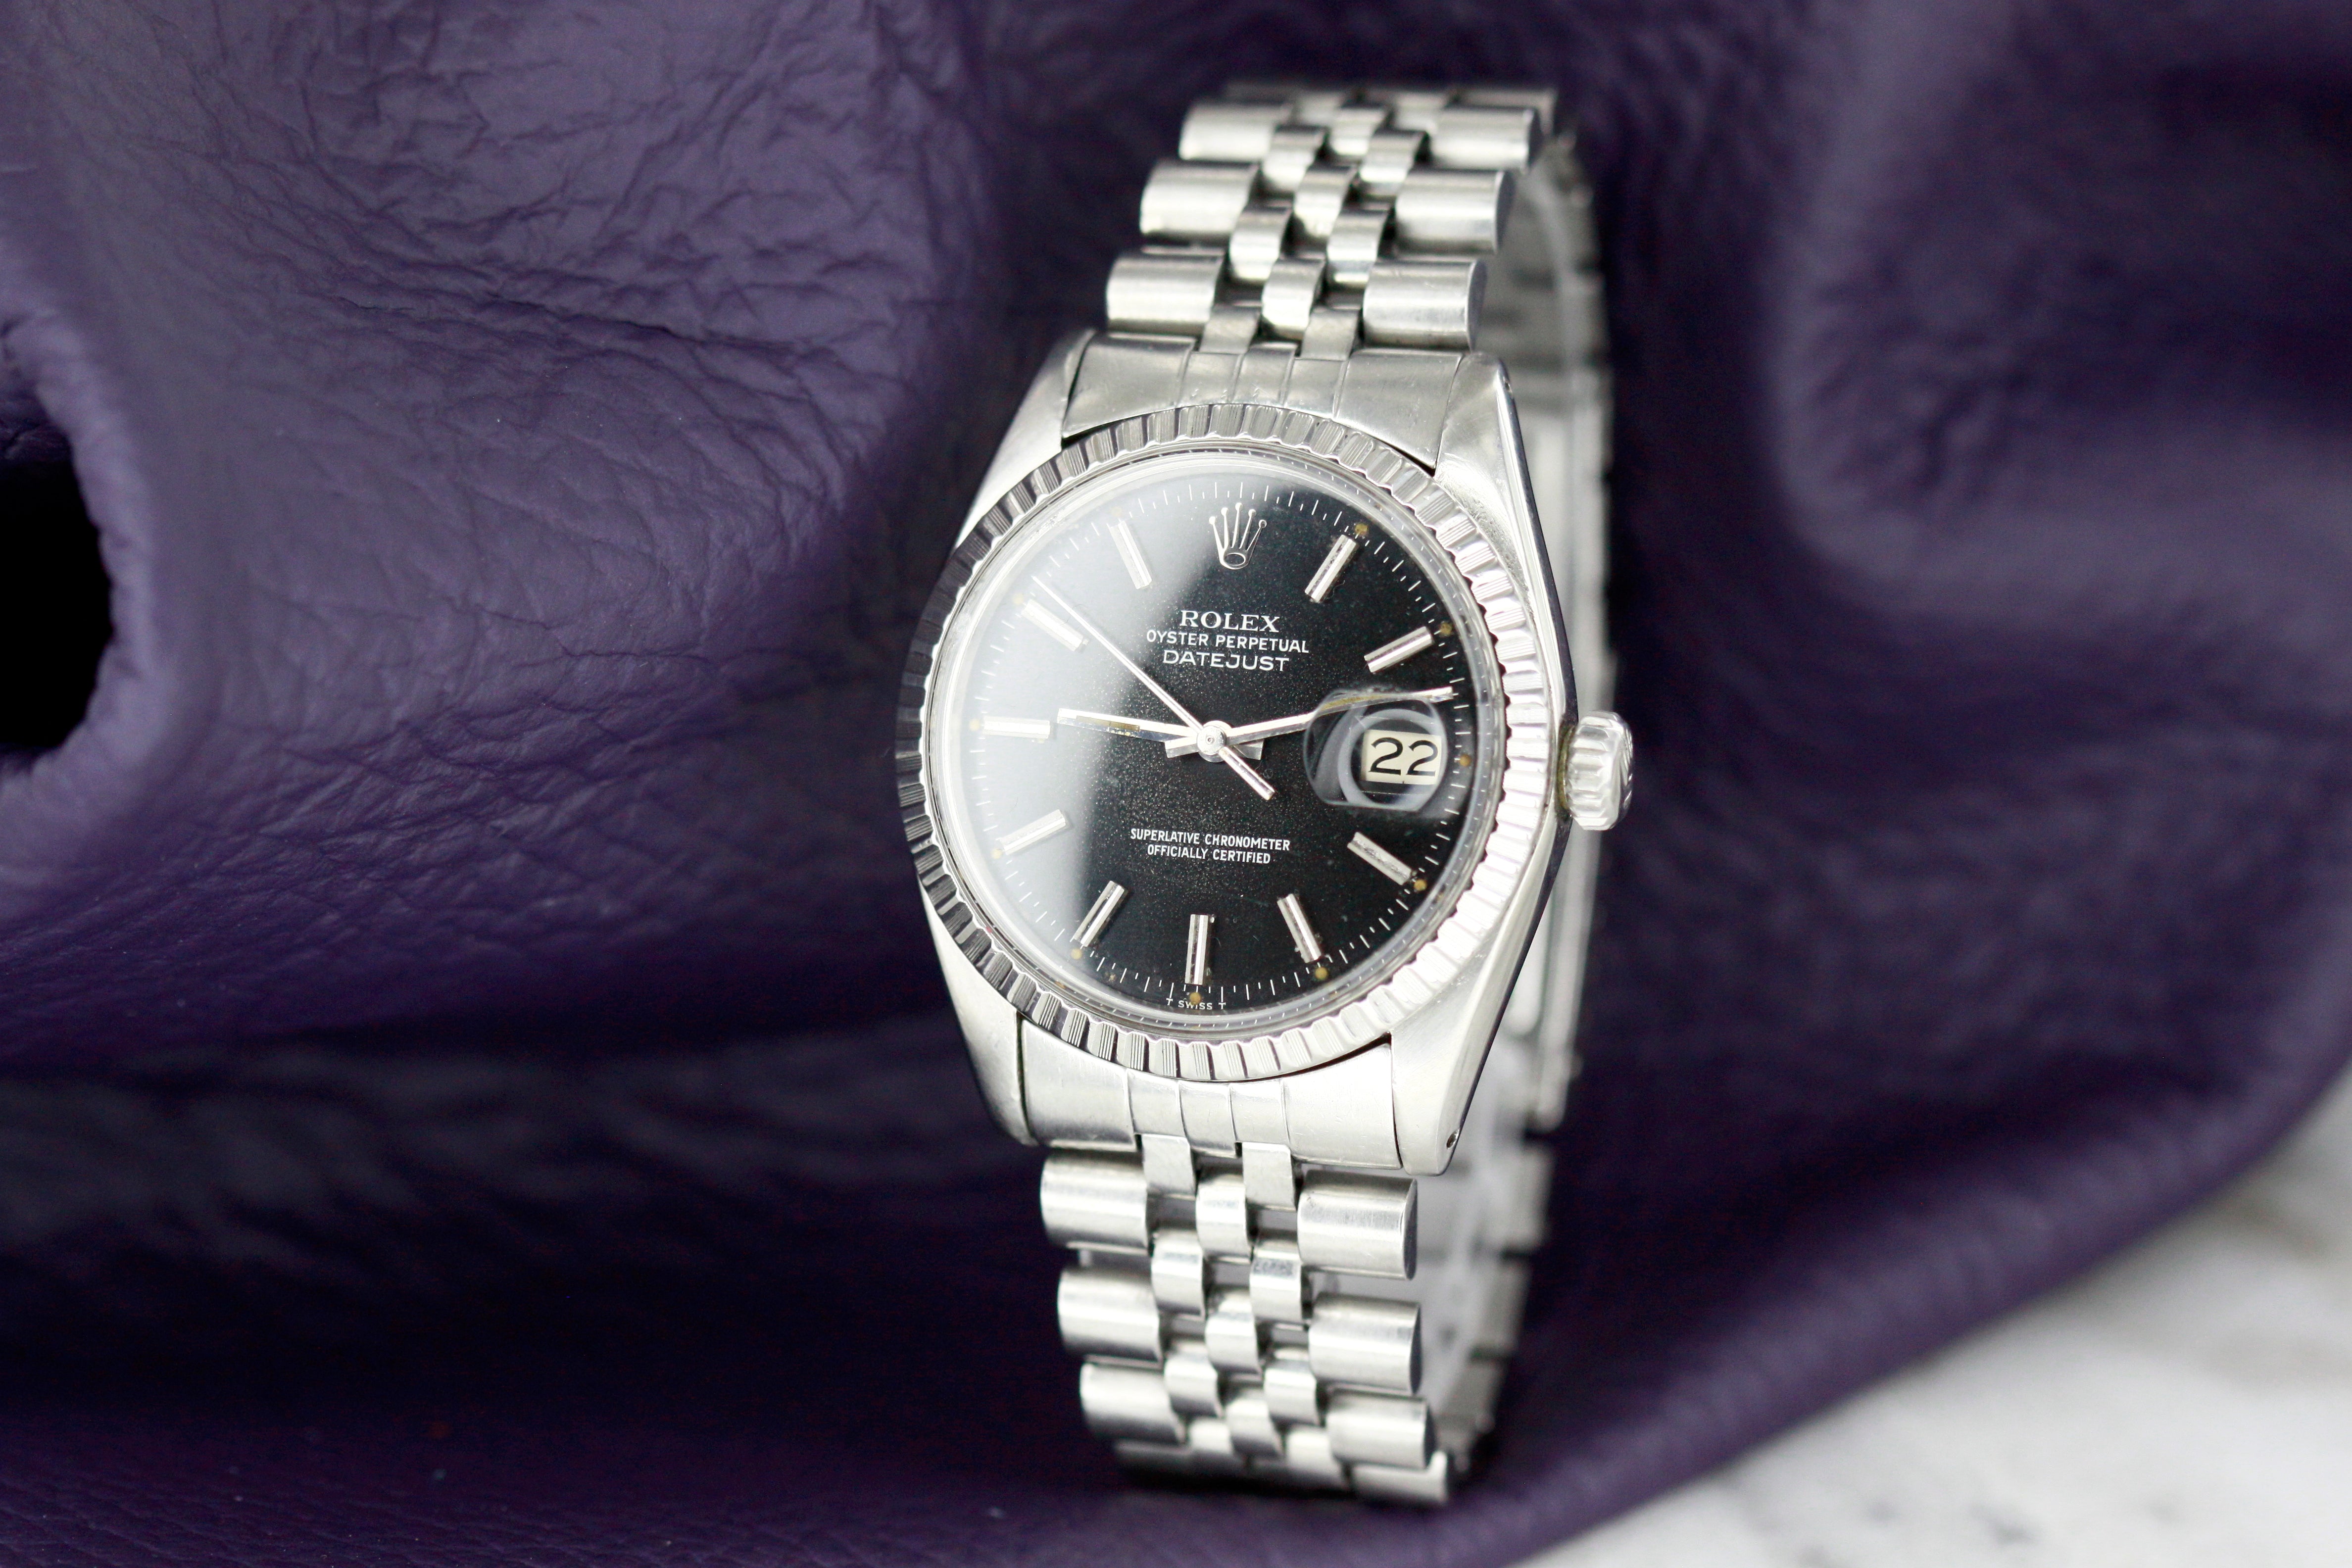 Rolex Datejust ref 16030 Black dial from 1983 with stunning patina